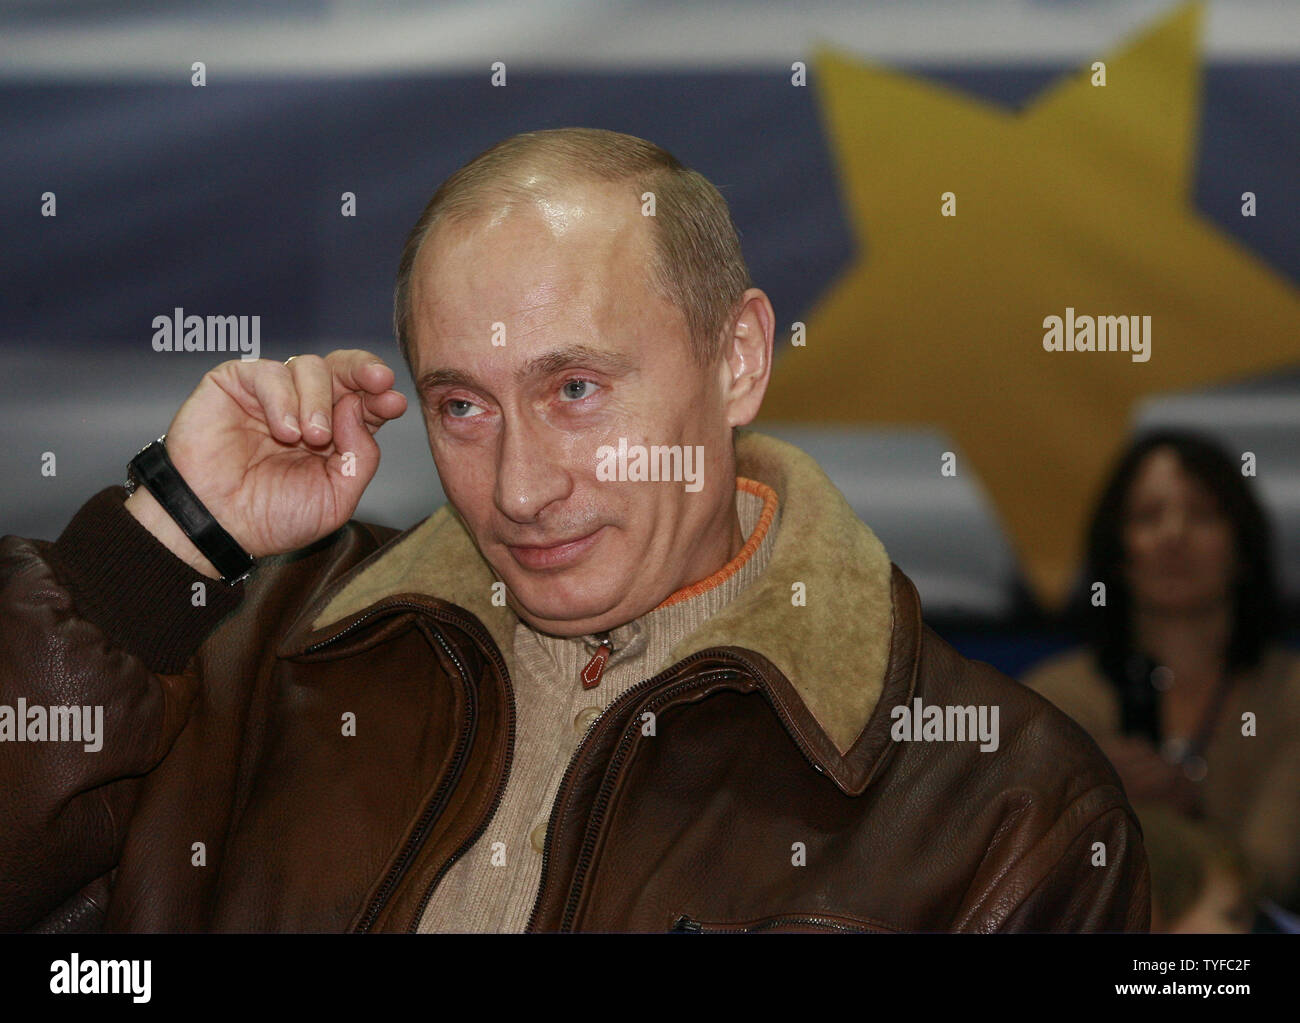 Russian President Vladimir Putin attends a judo competition in Moscow on December 15, 2007. Putin accused the West on Saturday of playing politics with European arms control and warned that the launch of US interceptor missiles could trigger a Russian missile strike. (UPI Photo/Anatoli Zhdanov).. Stock Photo